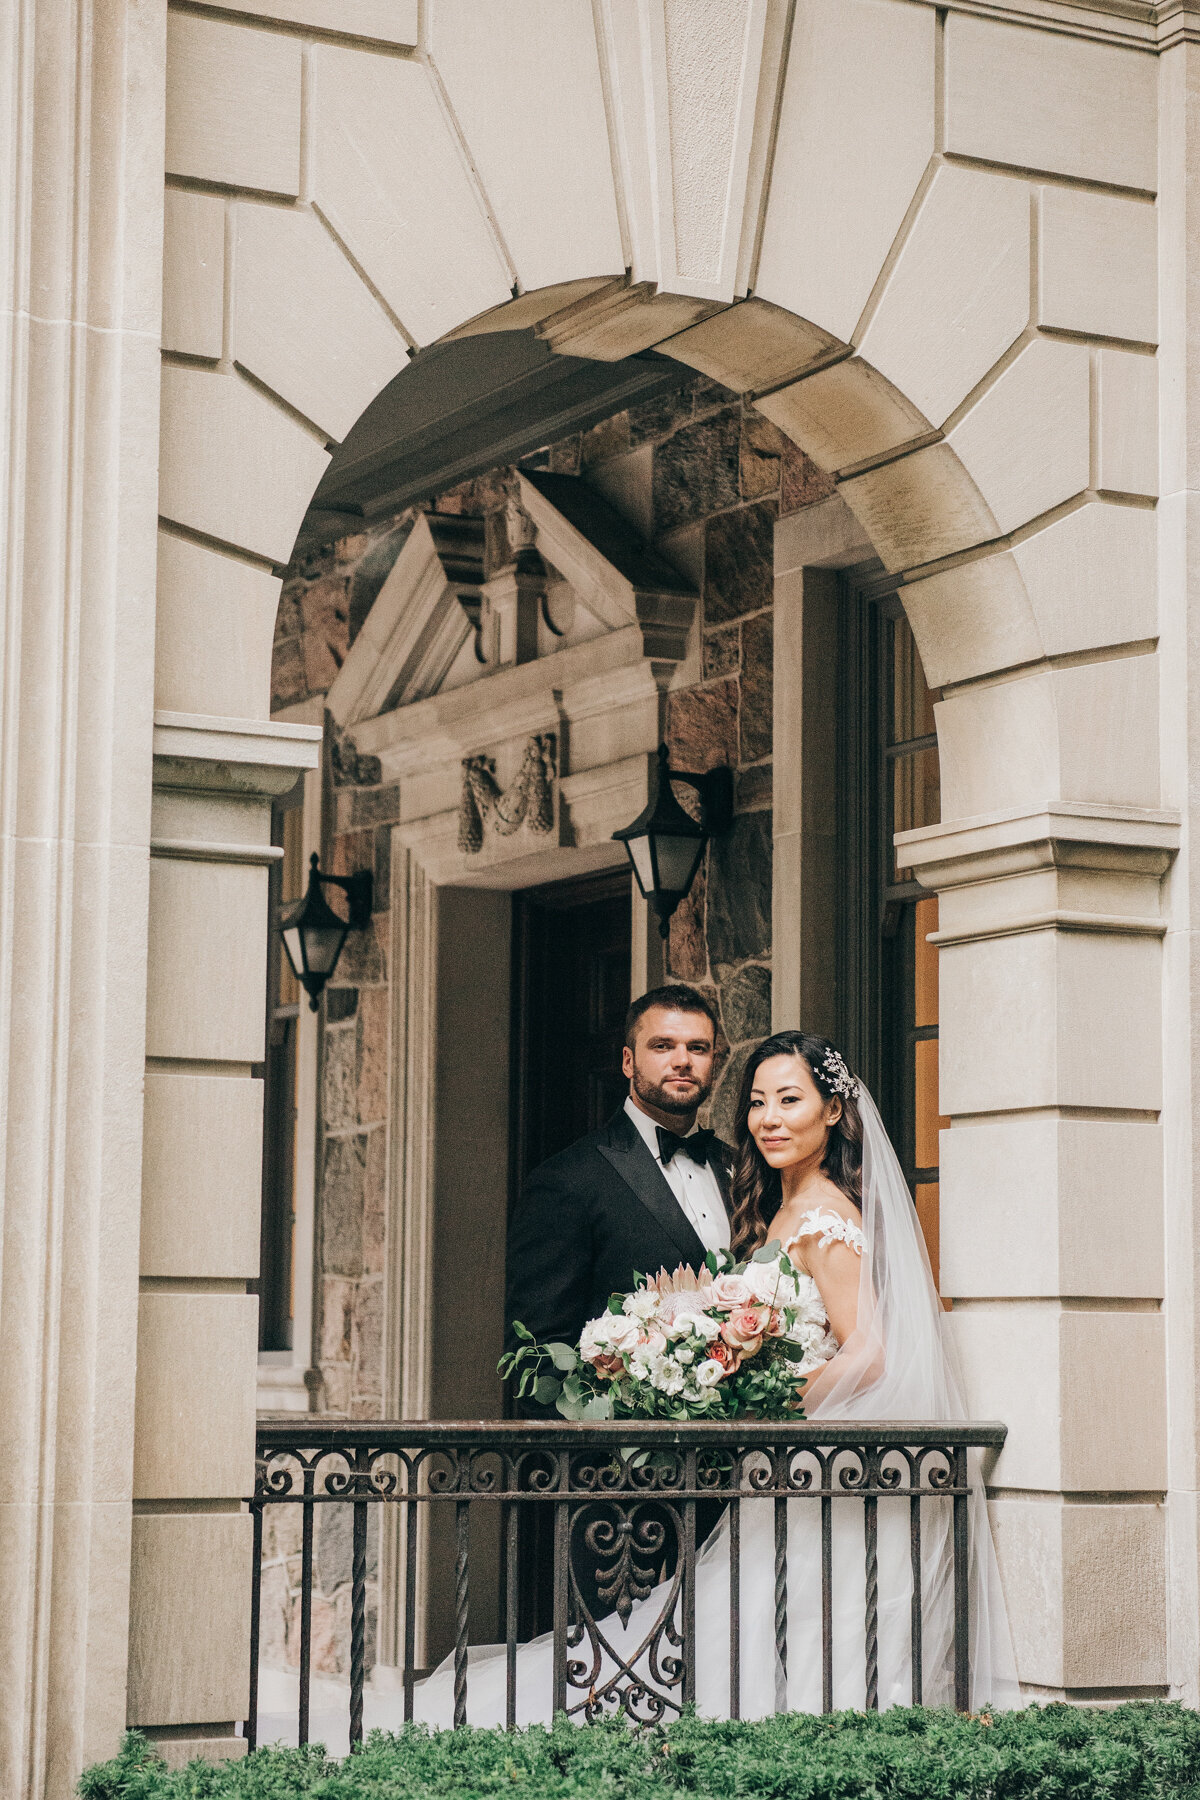 Luxurious bride and groom portraits on exquisite balcony